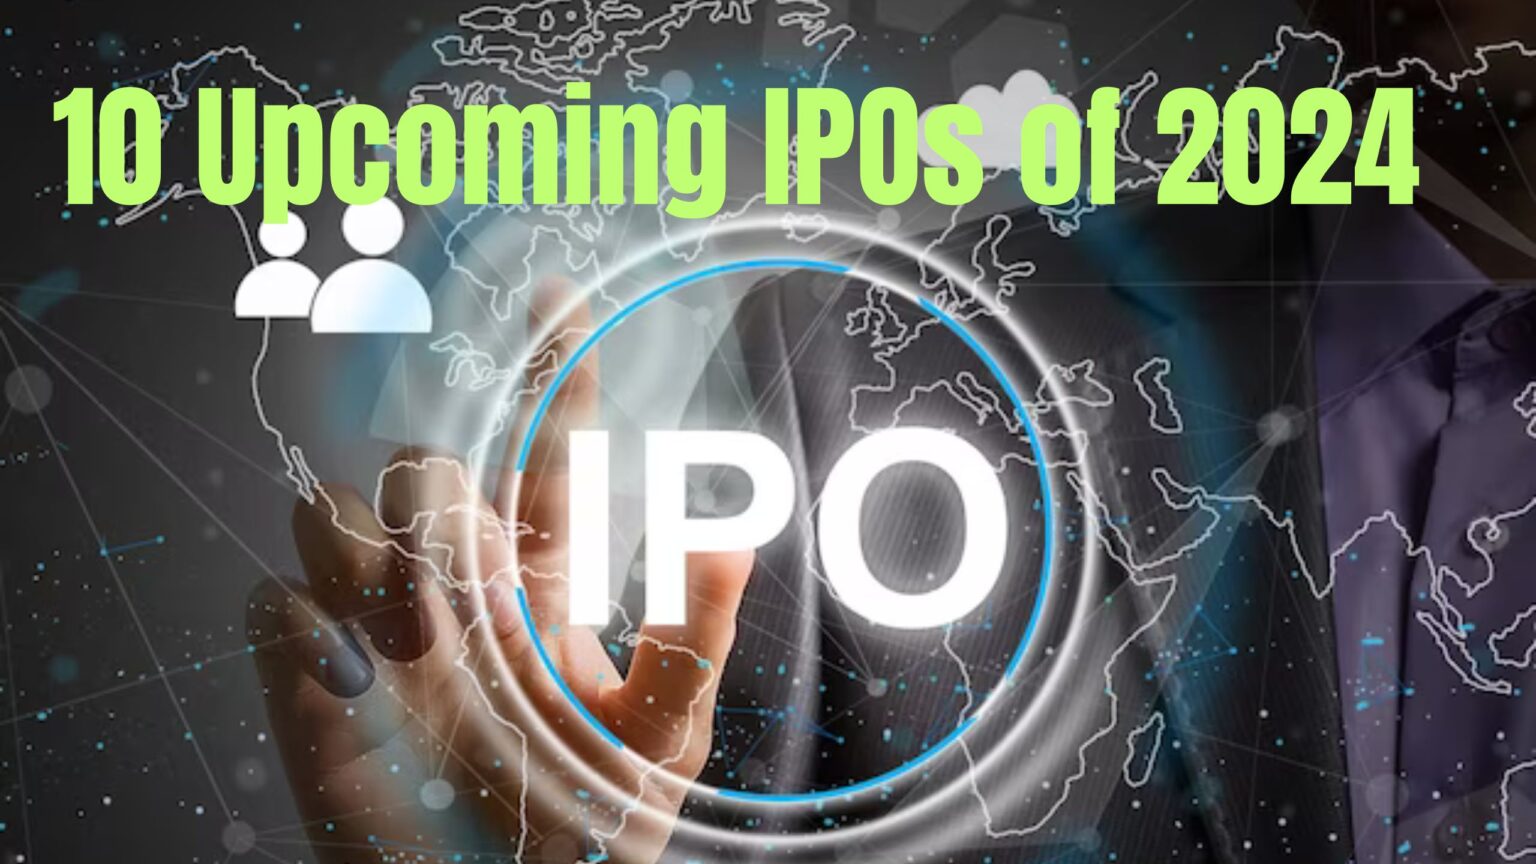 10 Upcoming IPOs of 2024